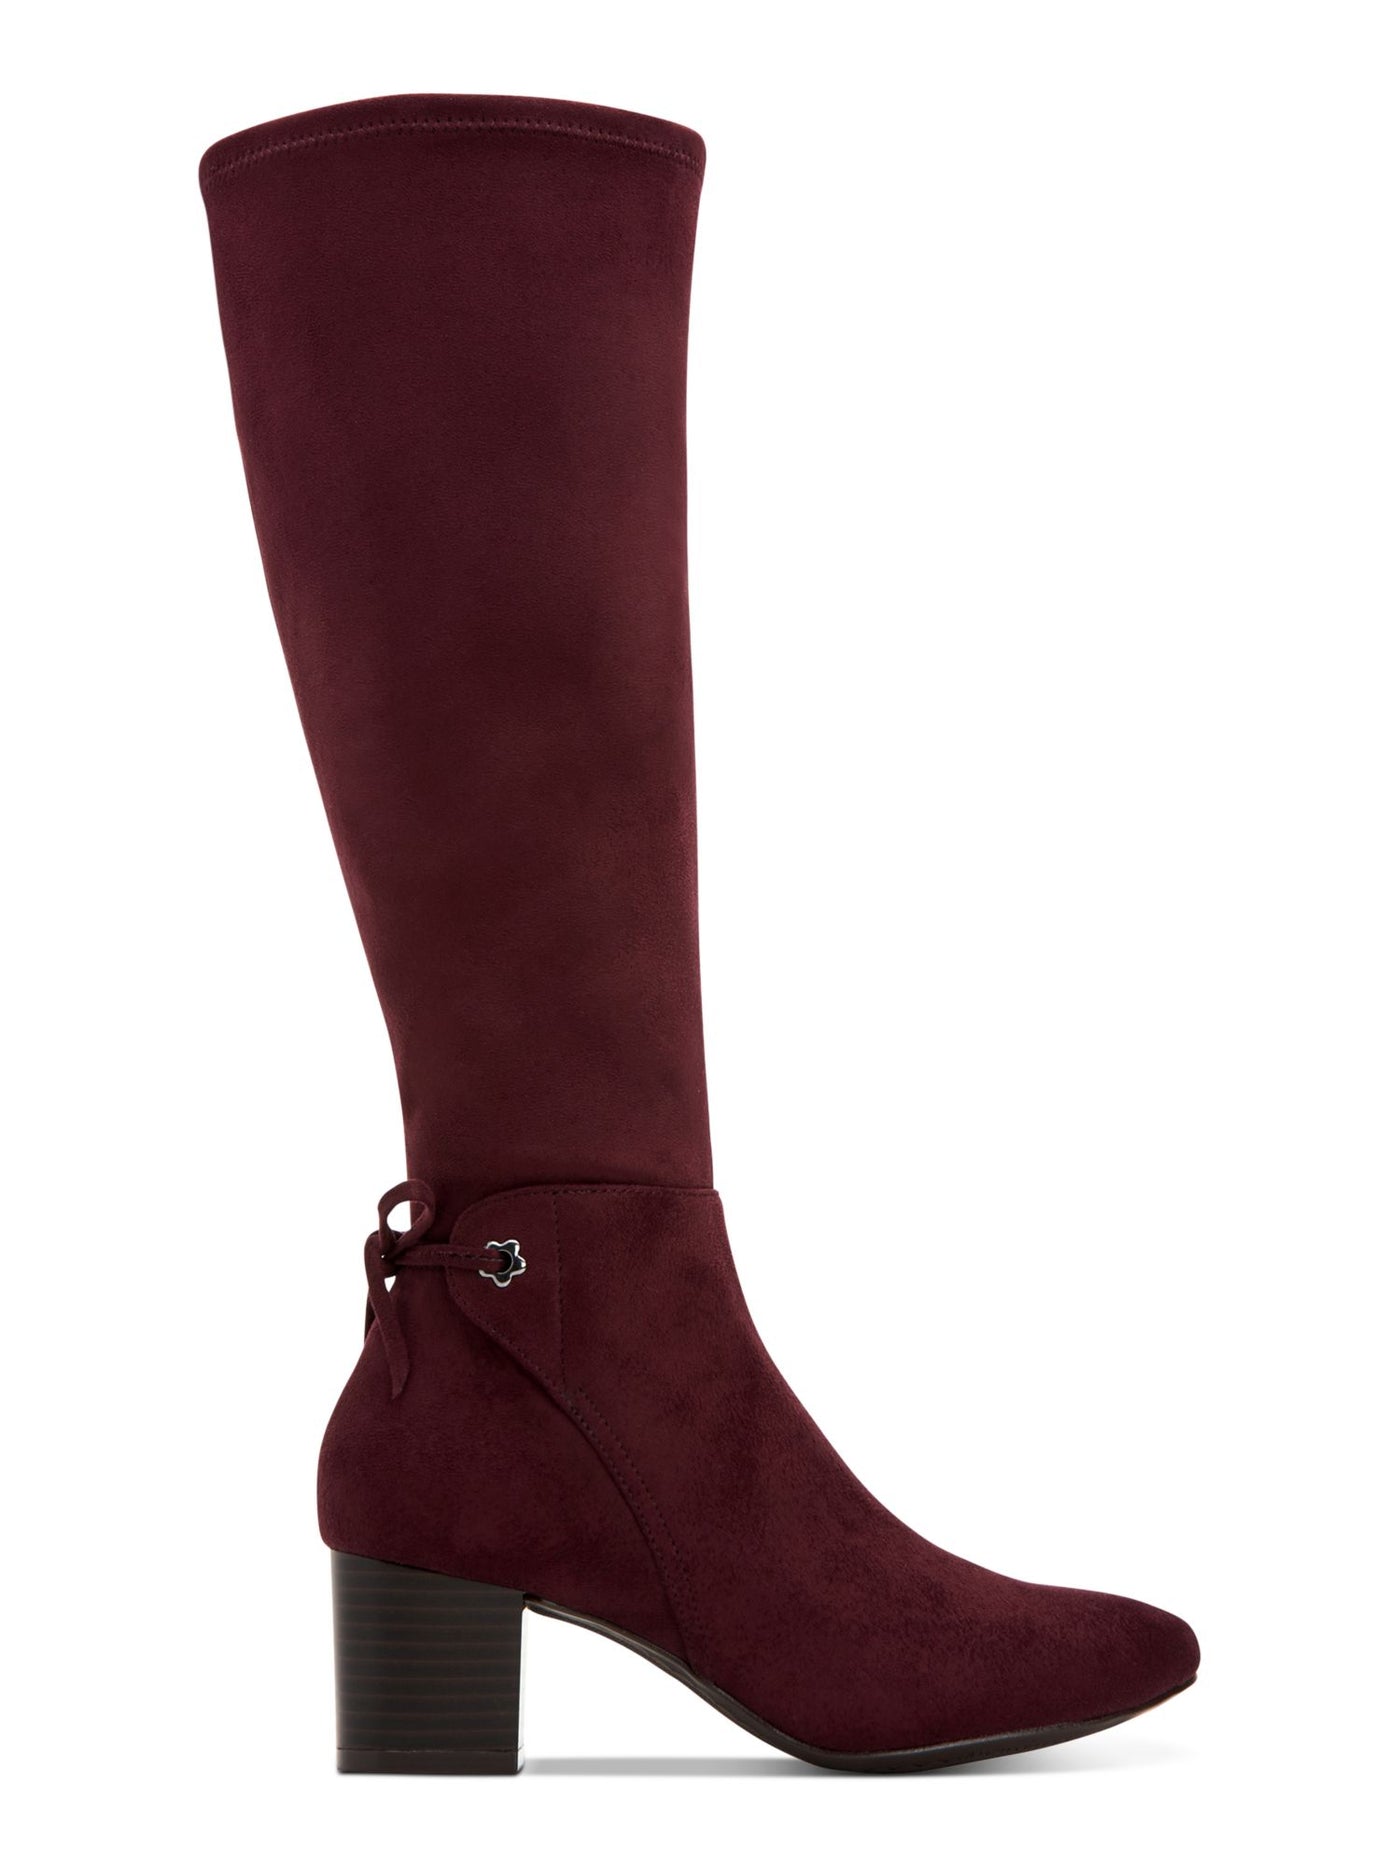 CHARTER CLUB Womens Burgundy Flower Grommets Bow Accent Padded Jaccque Almond Toe Block Heel Zip-Up Boots Shoes 9 M